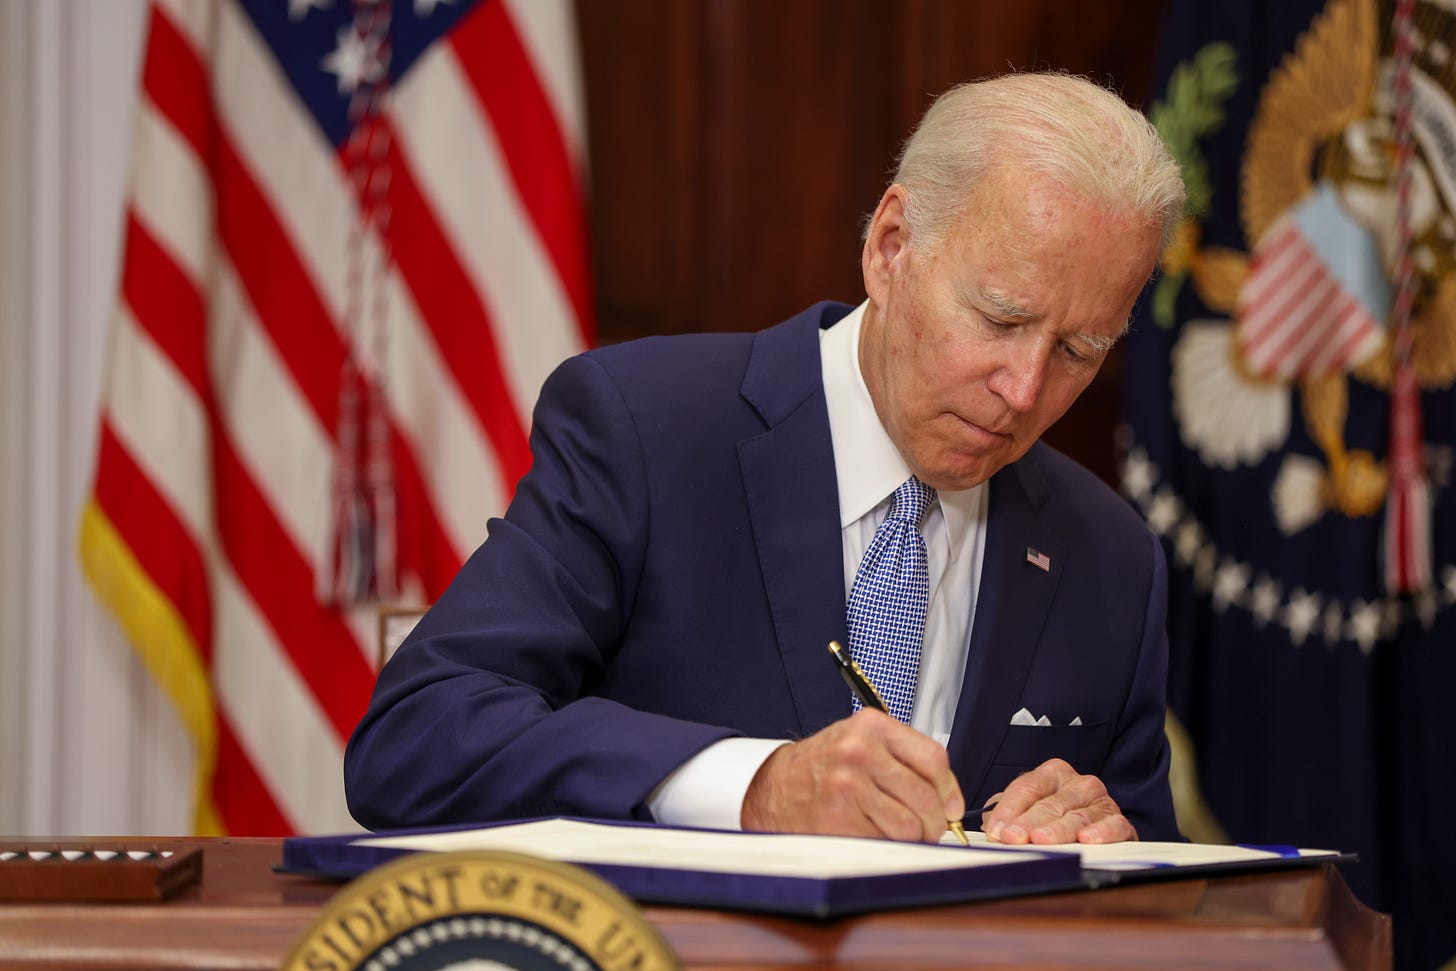 Joe Biden signs the Bipartisan Safer Communities Act on June 25, 2022. (Photo by Tasos Katopodis/Getty Images).